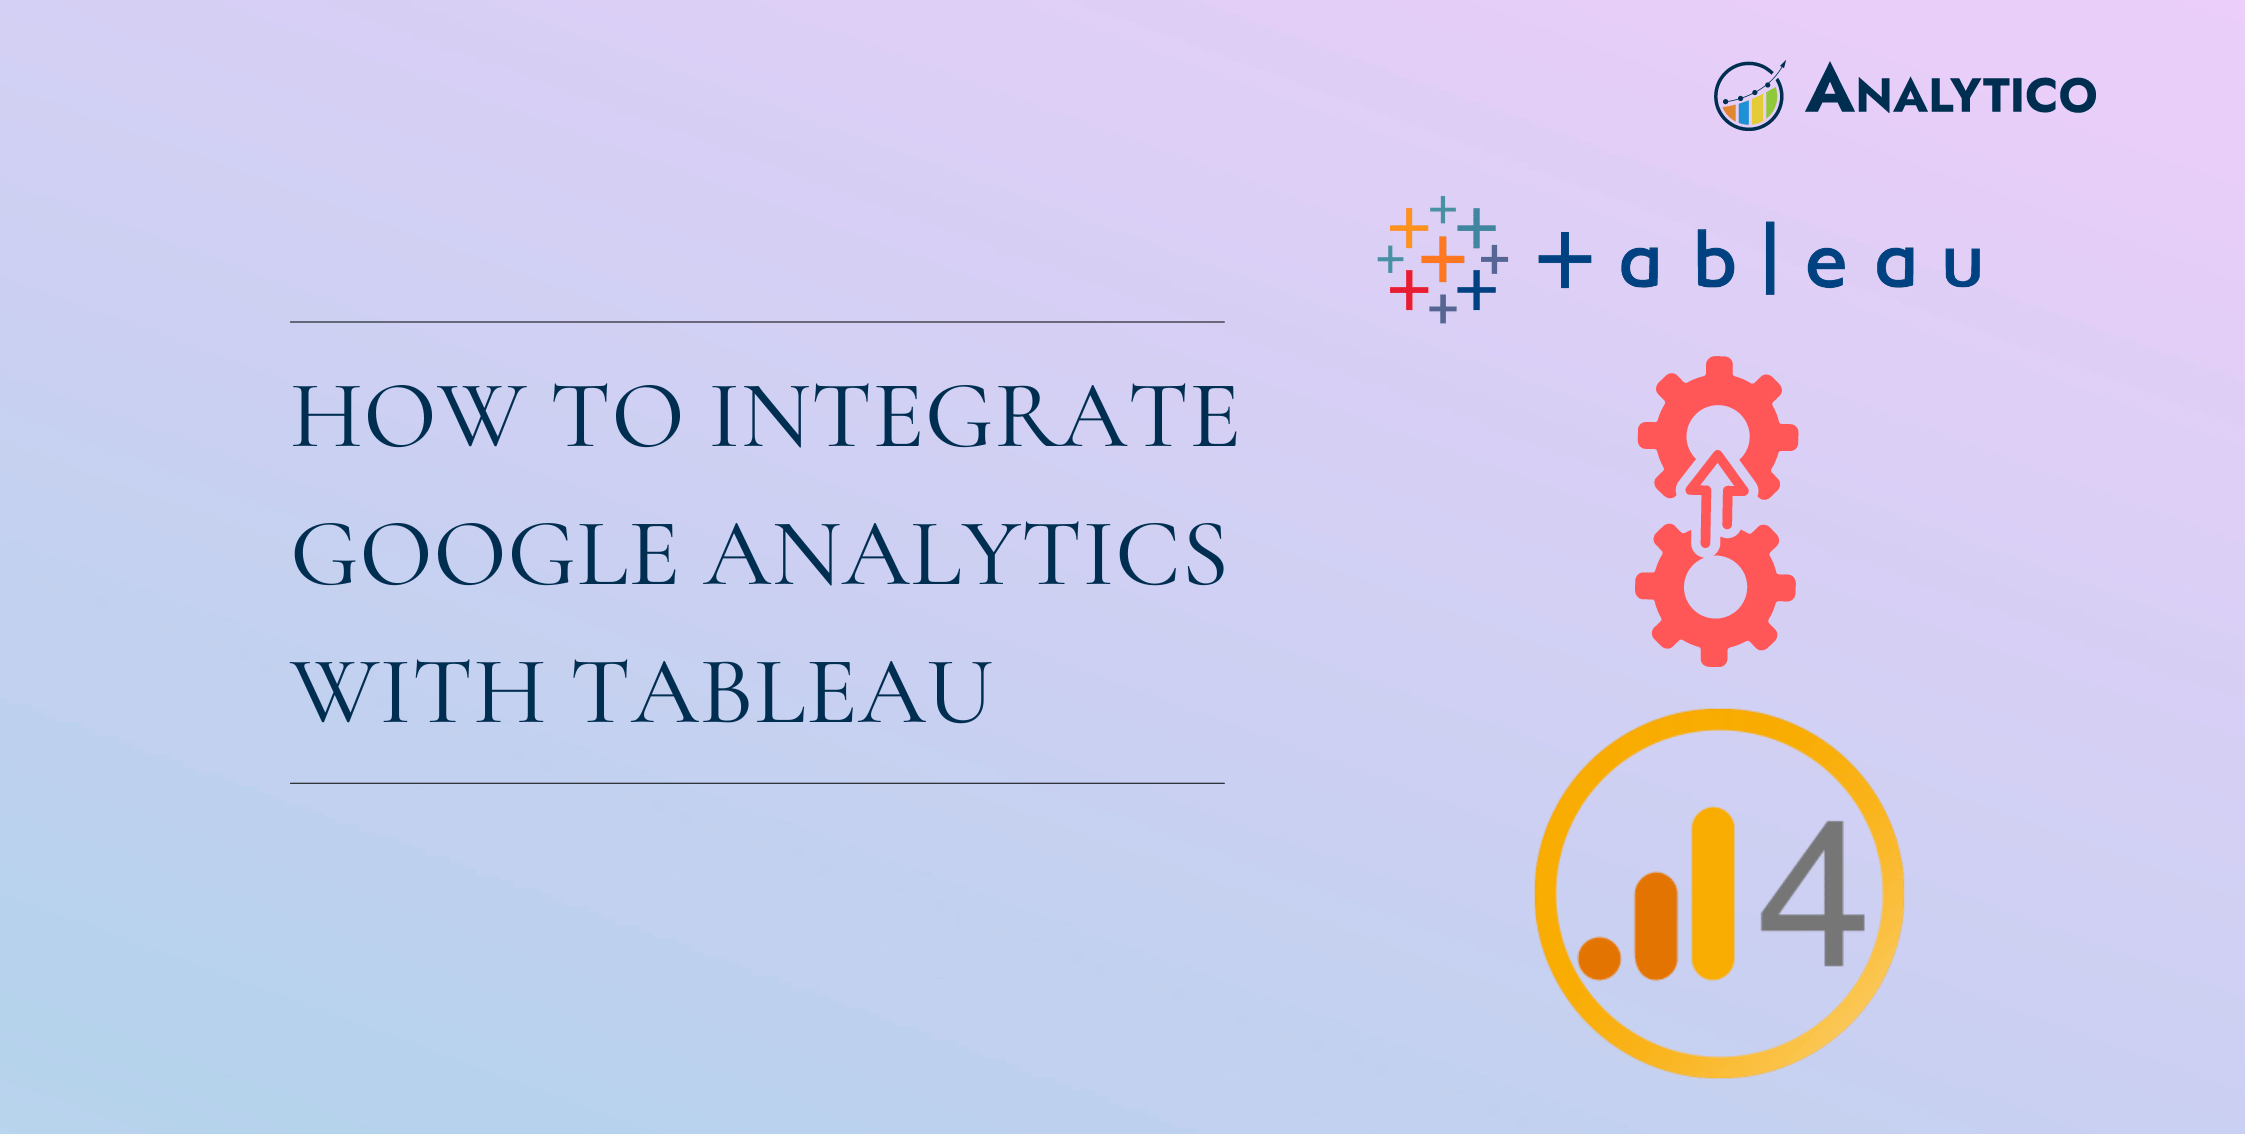 How to Integrate Google Analytics with Tableau